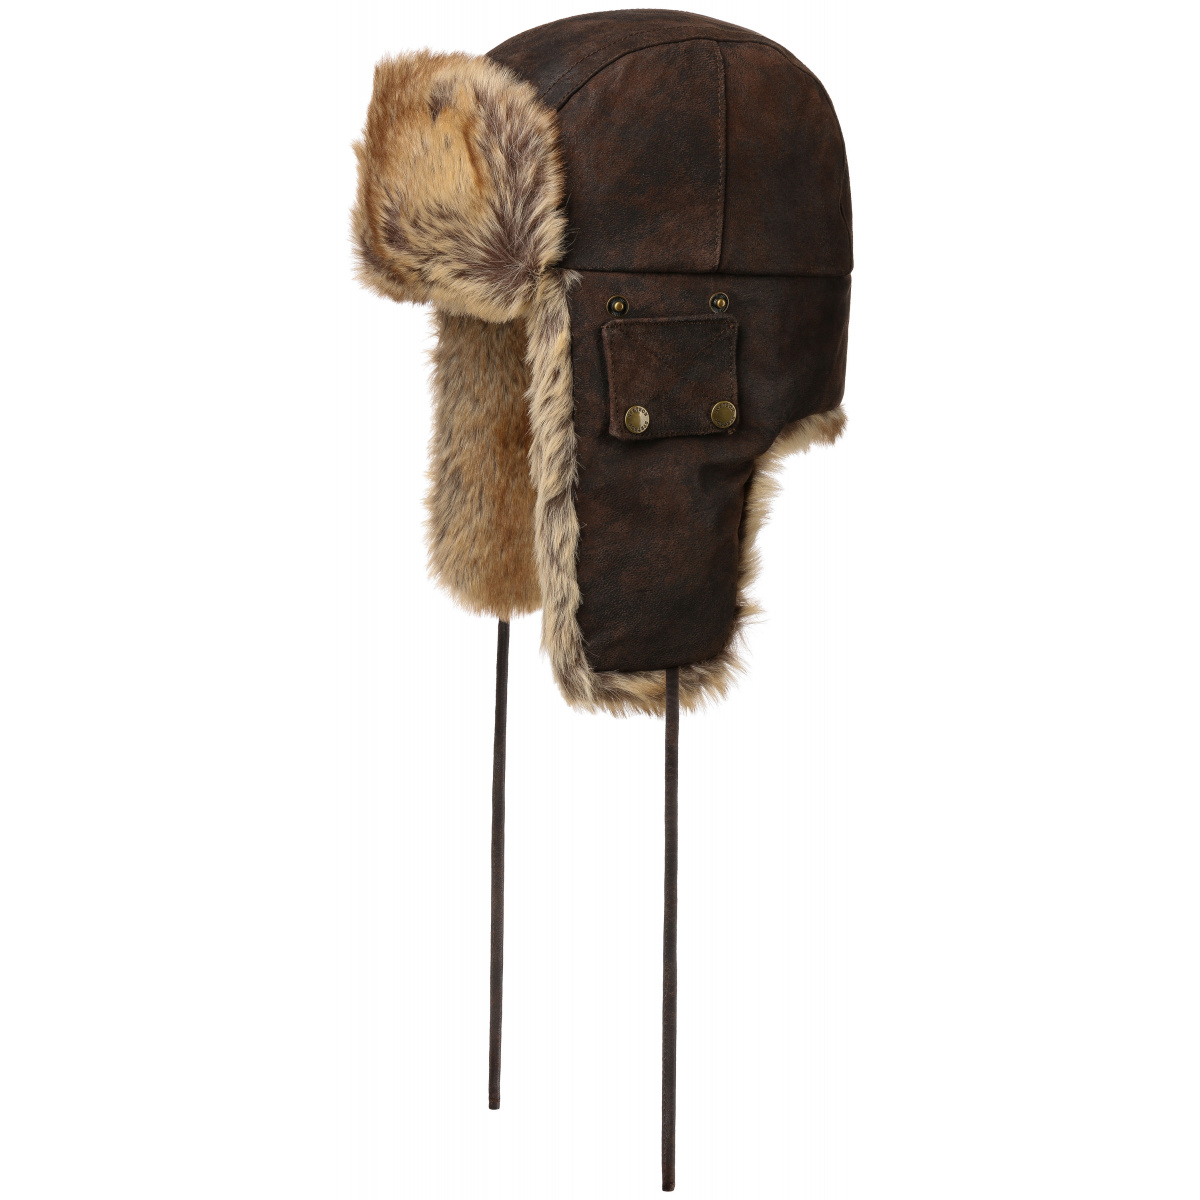 Chapka Bomber Cuir Marron Fausse Fourrure- Stetson Reference : 10834